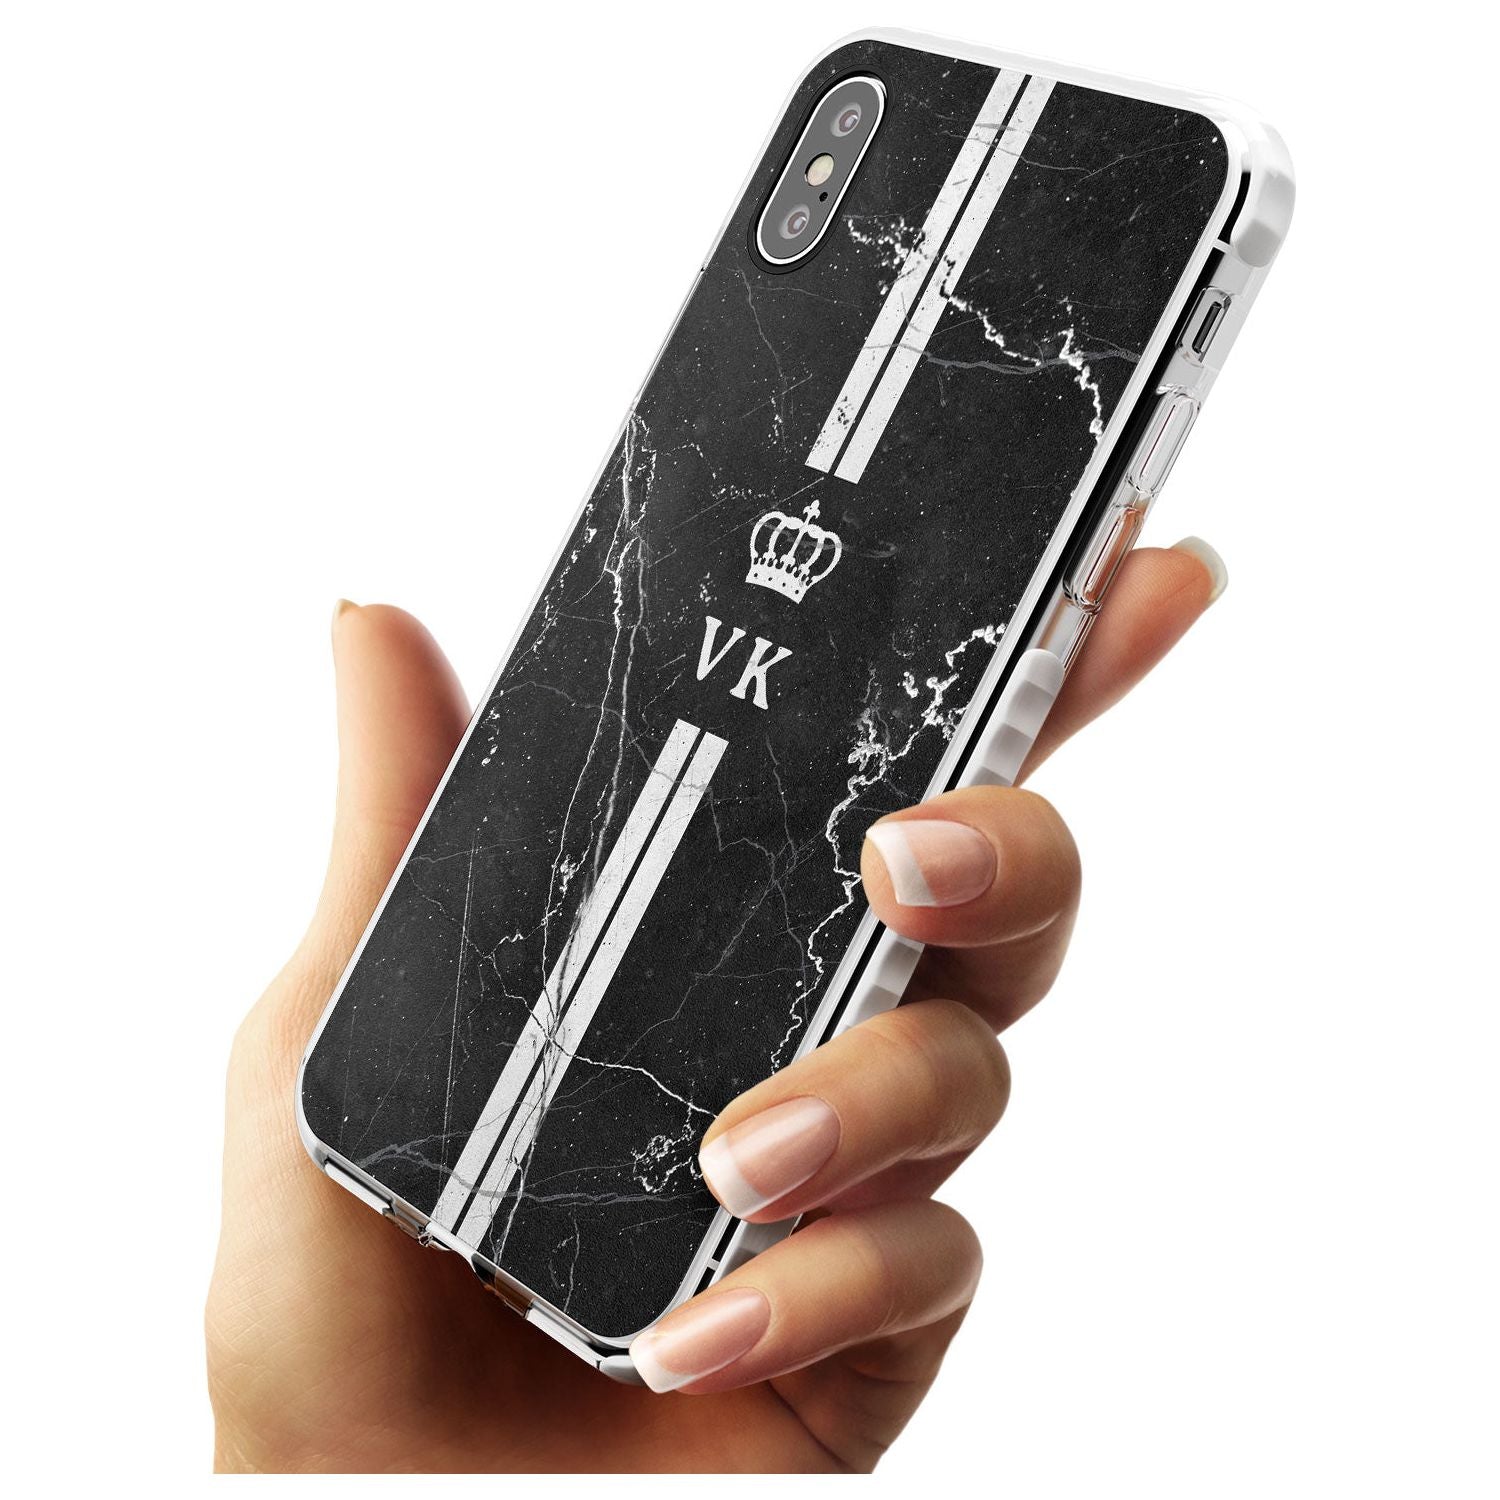 Stripes + Initials with Crown on Black Marble Impact Phone Case for iPhone X XS Max XR